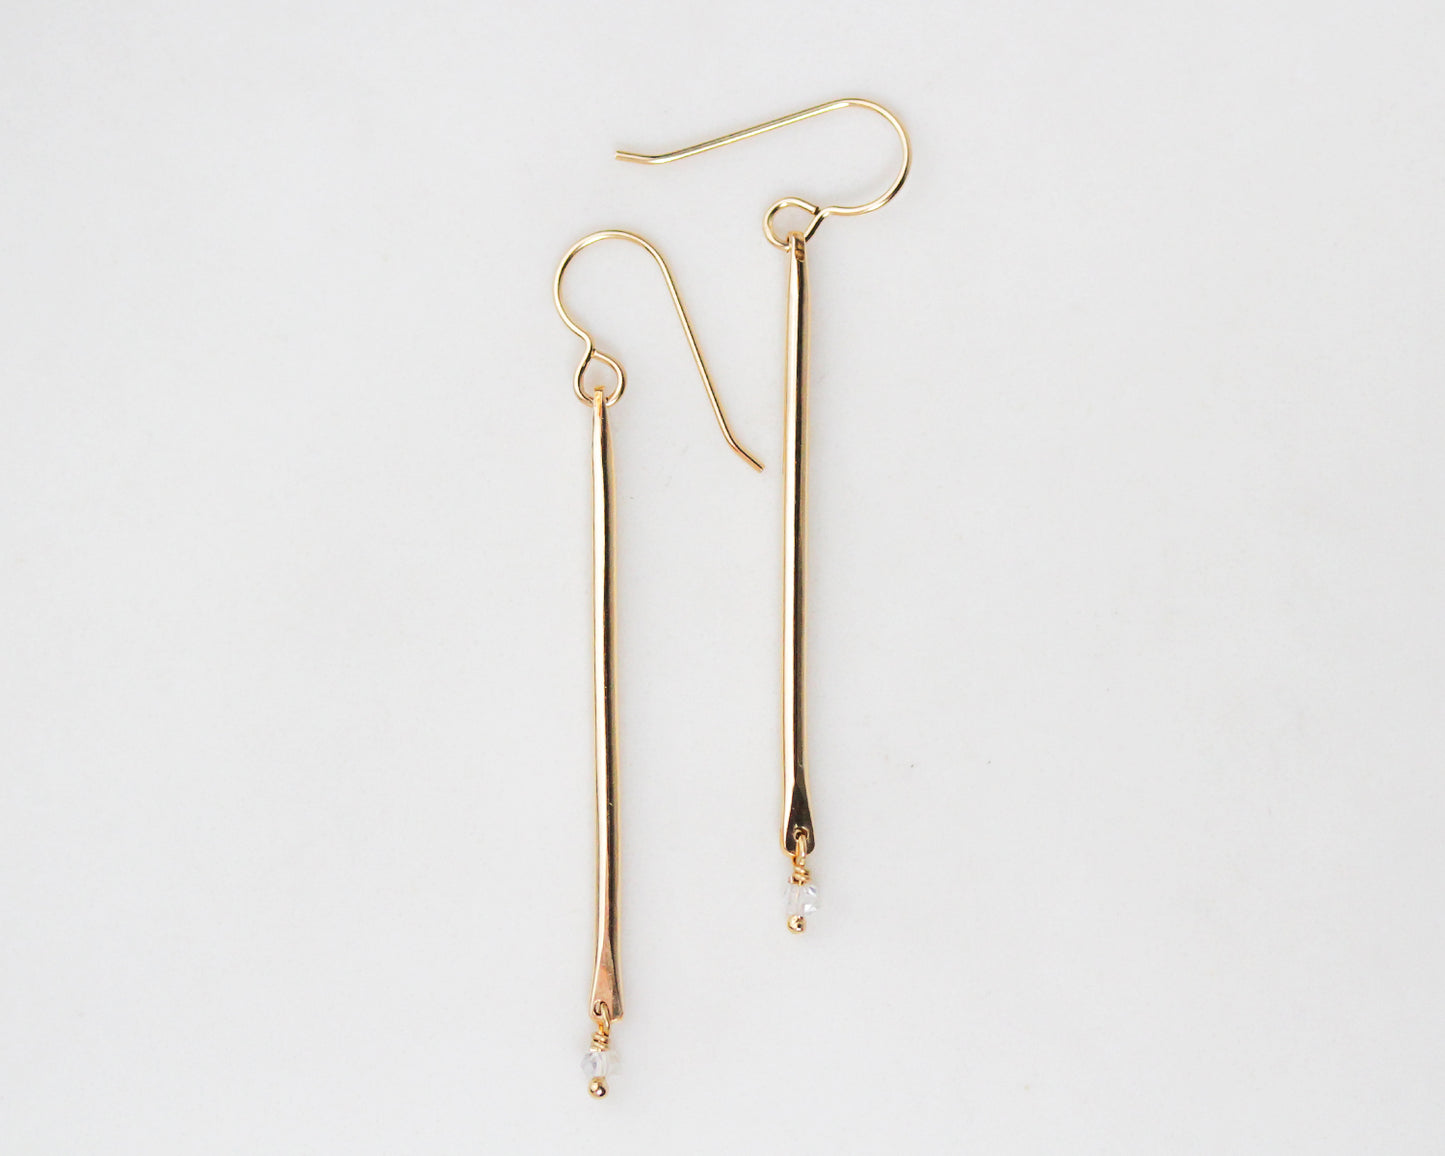 Image features our 14 karat yellow gold filled delicate and lightly hammered birthstone pendulum earrings. Featuring Herkimer diamonds, as the birthstone drop, these minimal earrings are the perfect gift for her and great for every day wear.